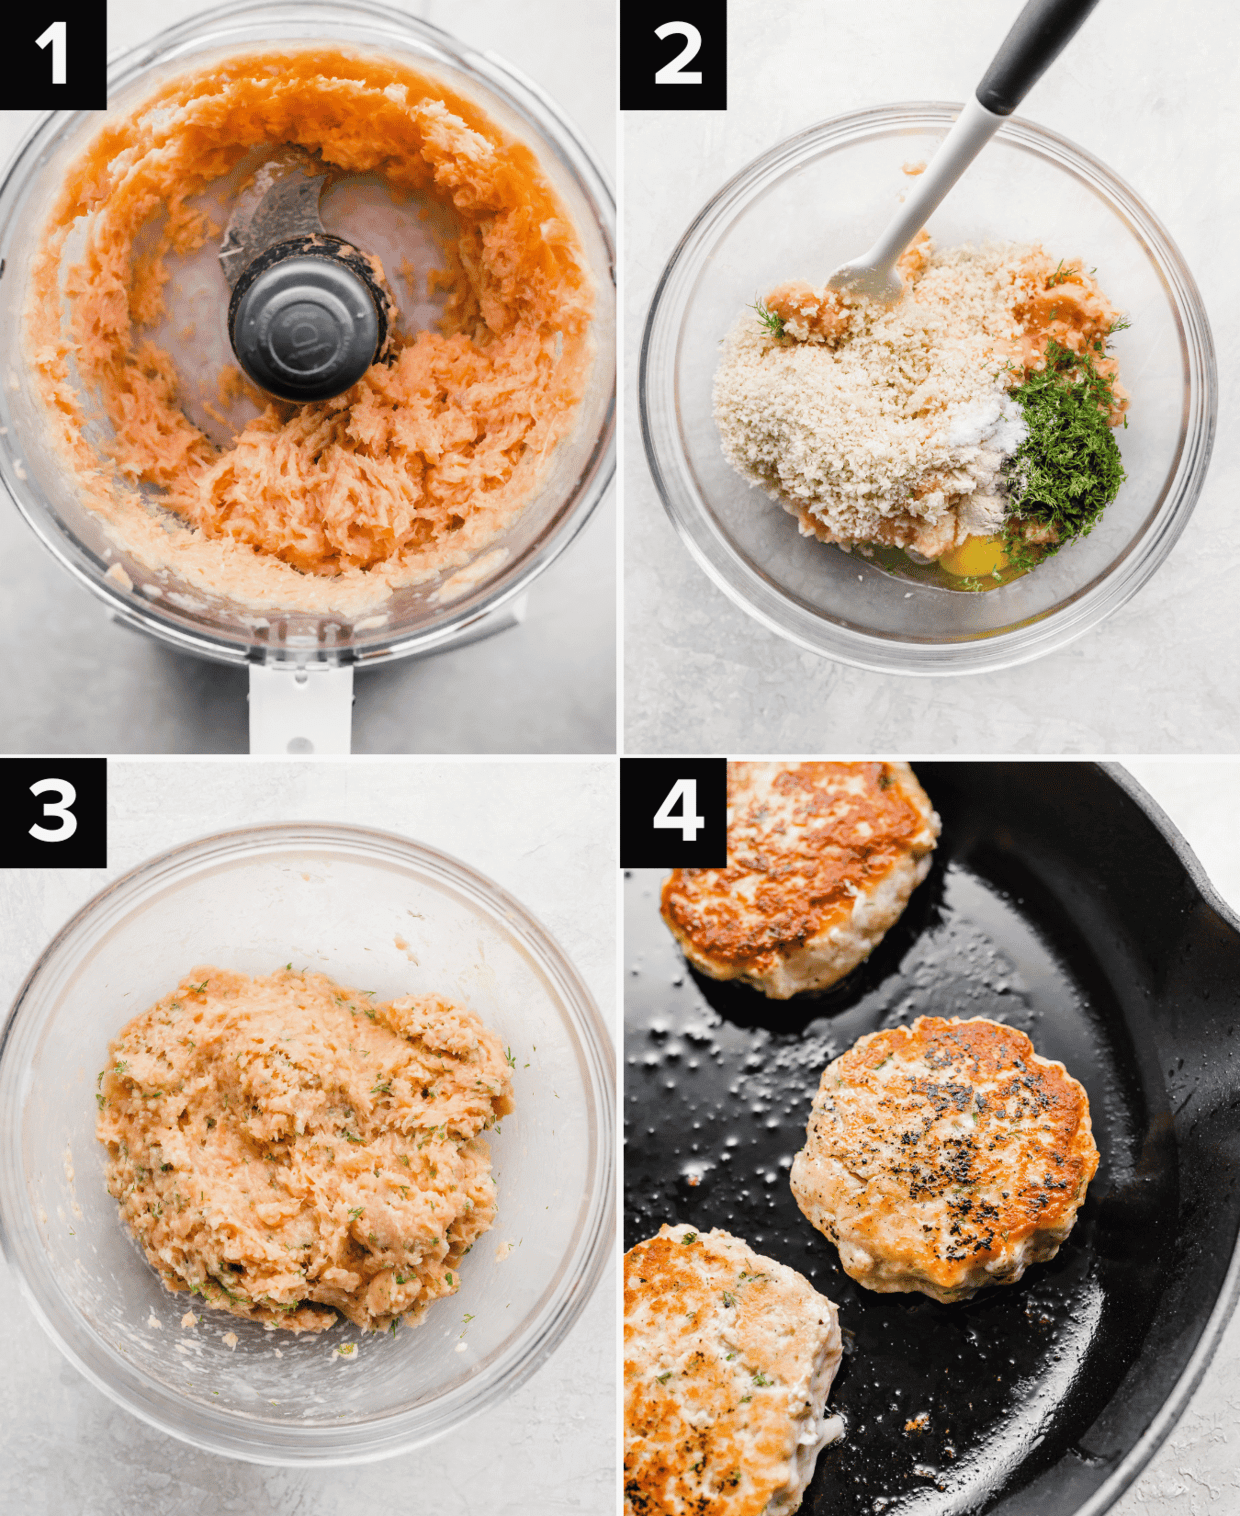 Four images showing how to make Salmon Burgers; top left is raw salmon in a food processor, top right is seasonings and salmon in a glass bowls, bottom left is Salmon Burger Patty mixture in a glass bowl, bottom right is salmon burger patties cooking in a black skillet.